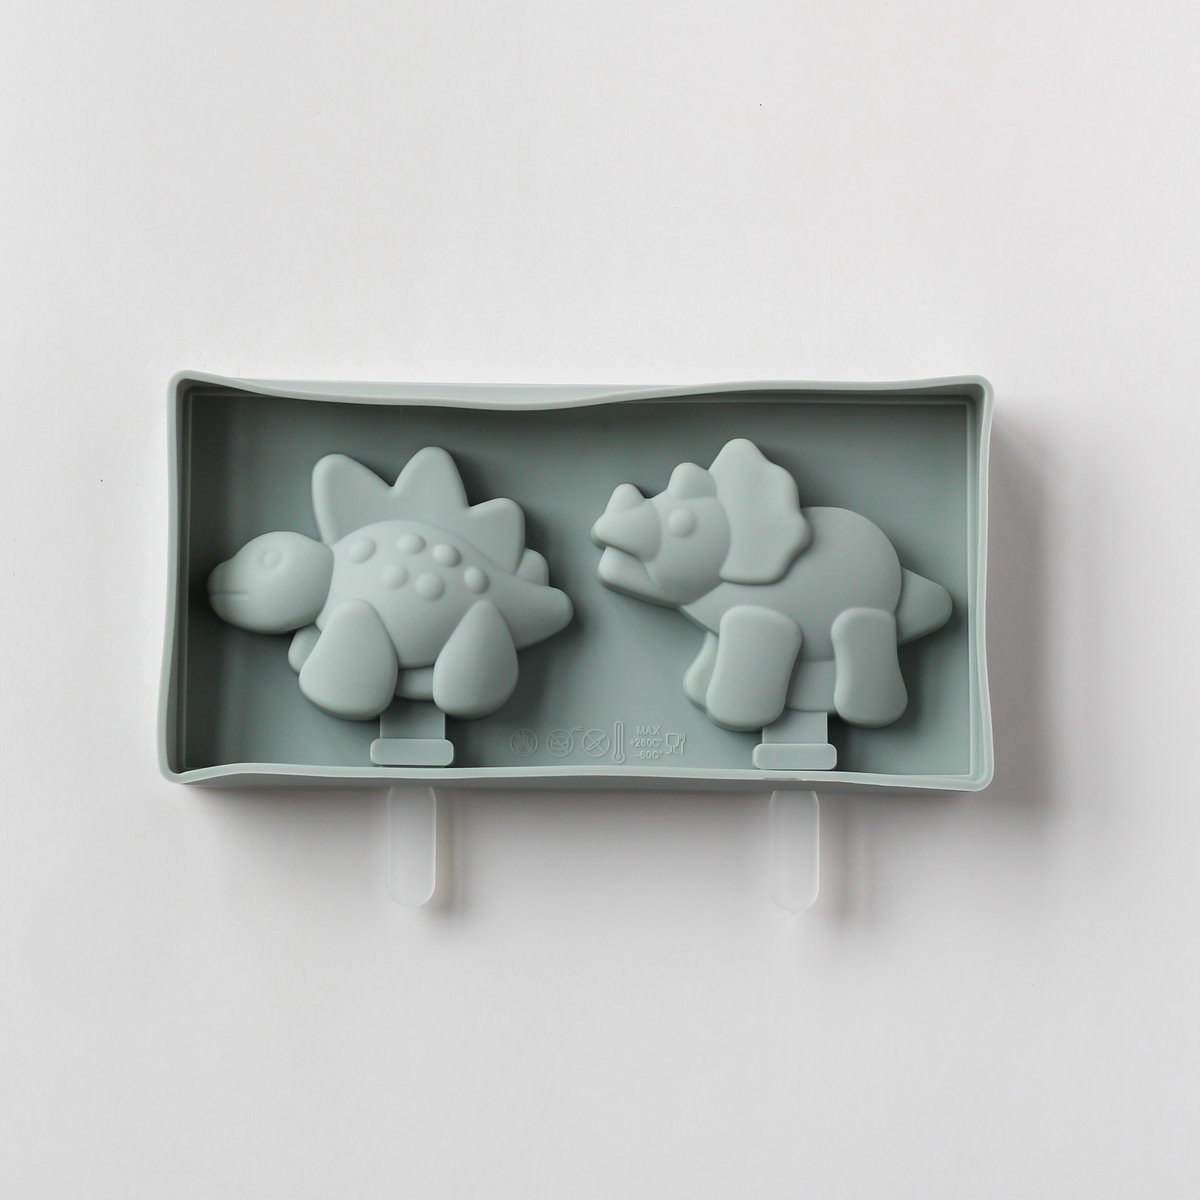 Little Giants Silicone Dinosaurs Ice Block Moulds from Bear & Moo